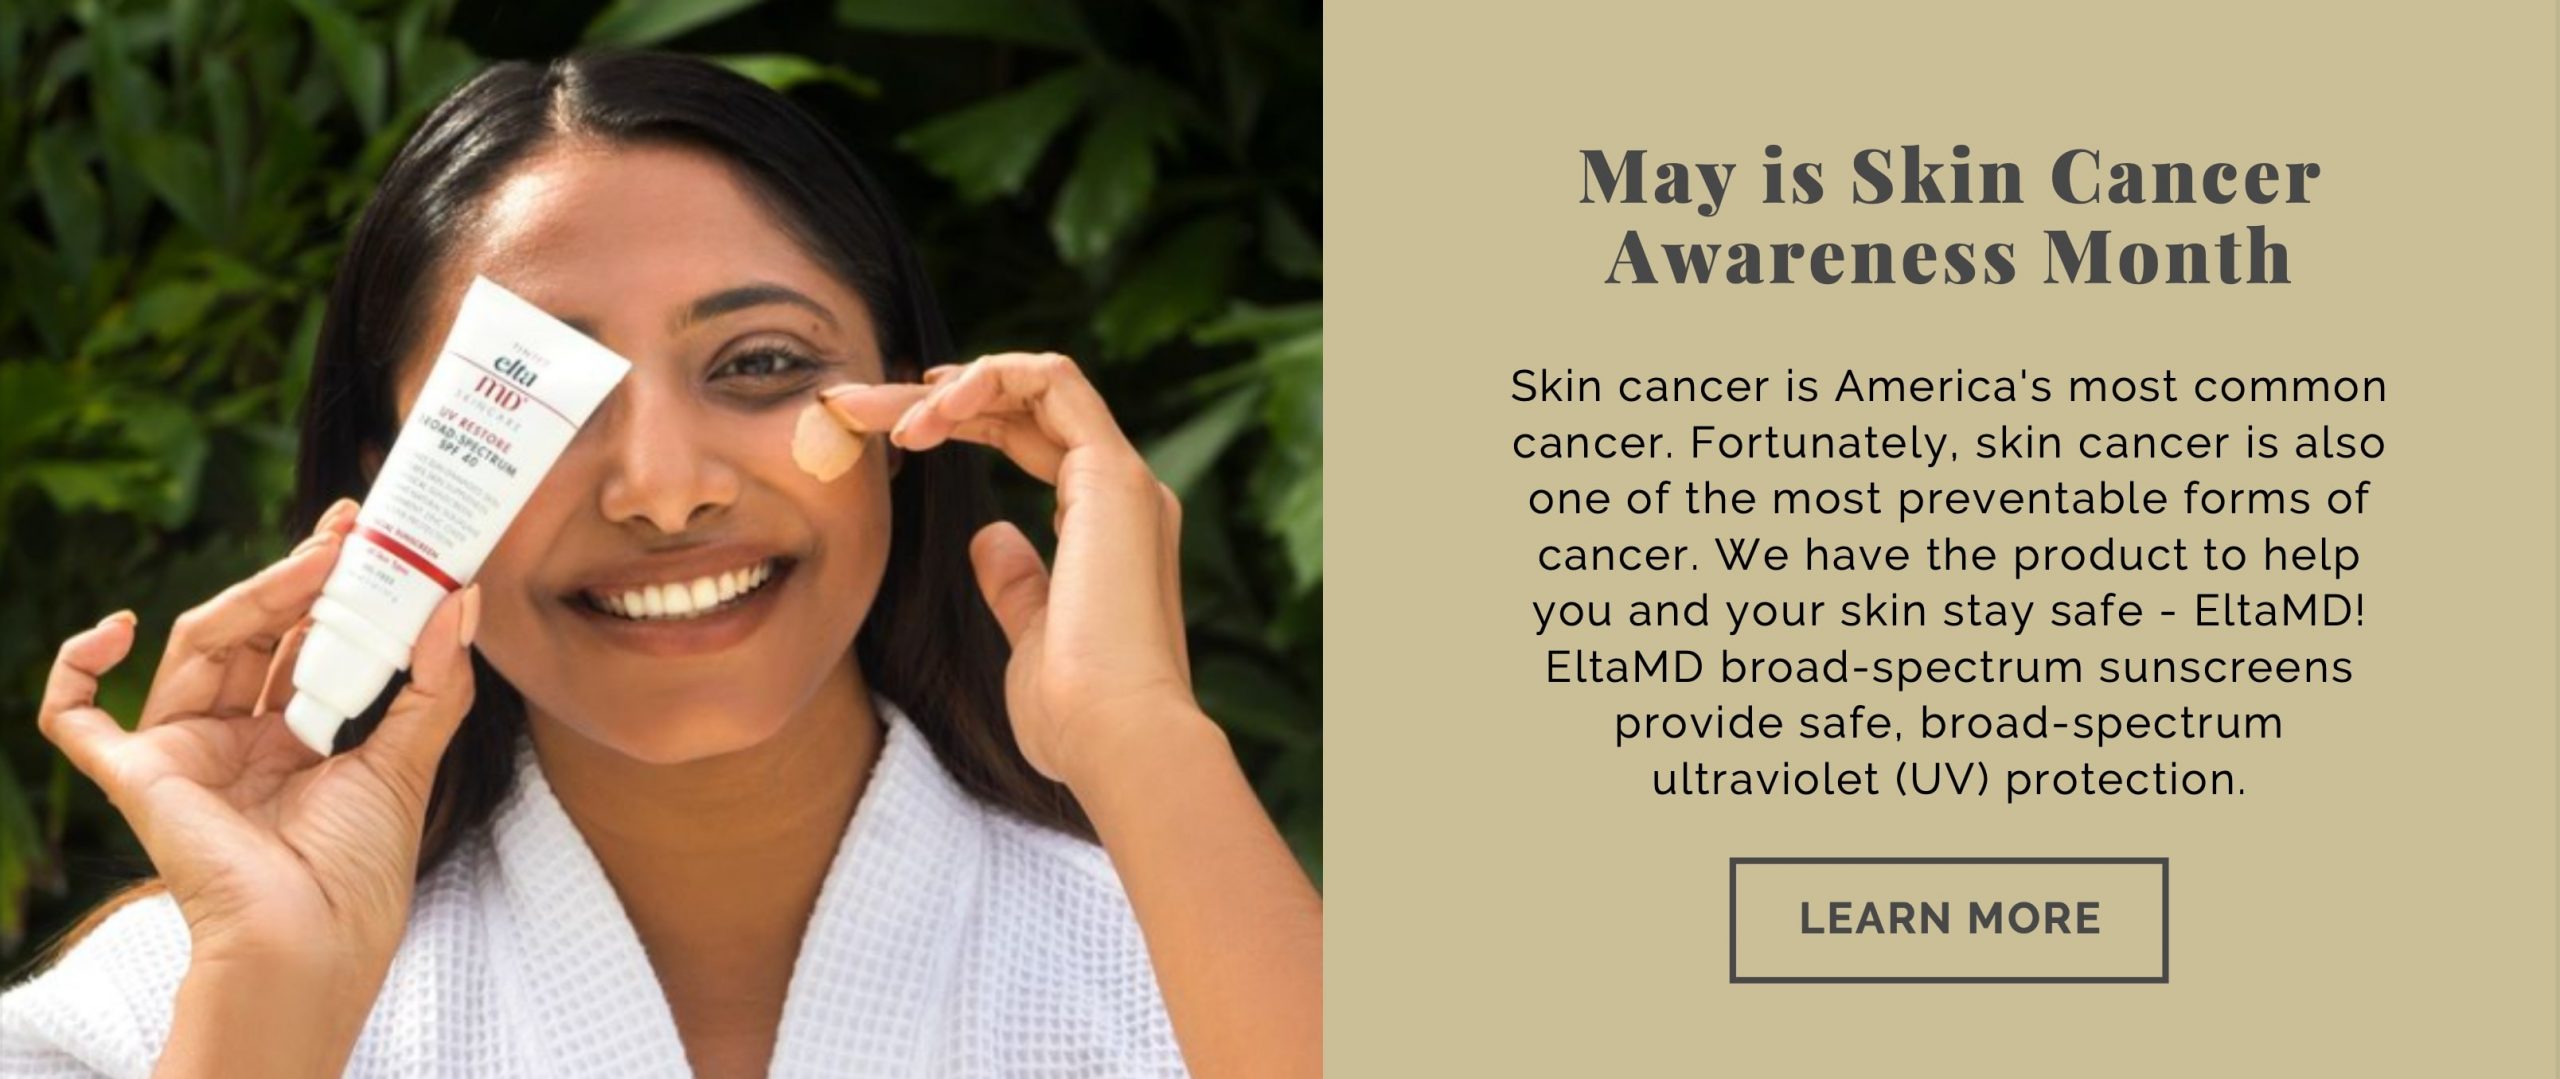 valley derm newsletter - may is skin cancer awareness month